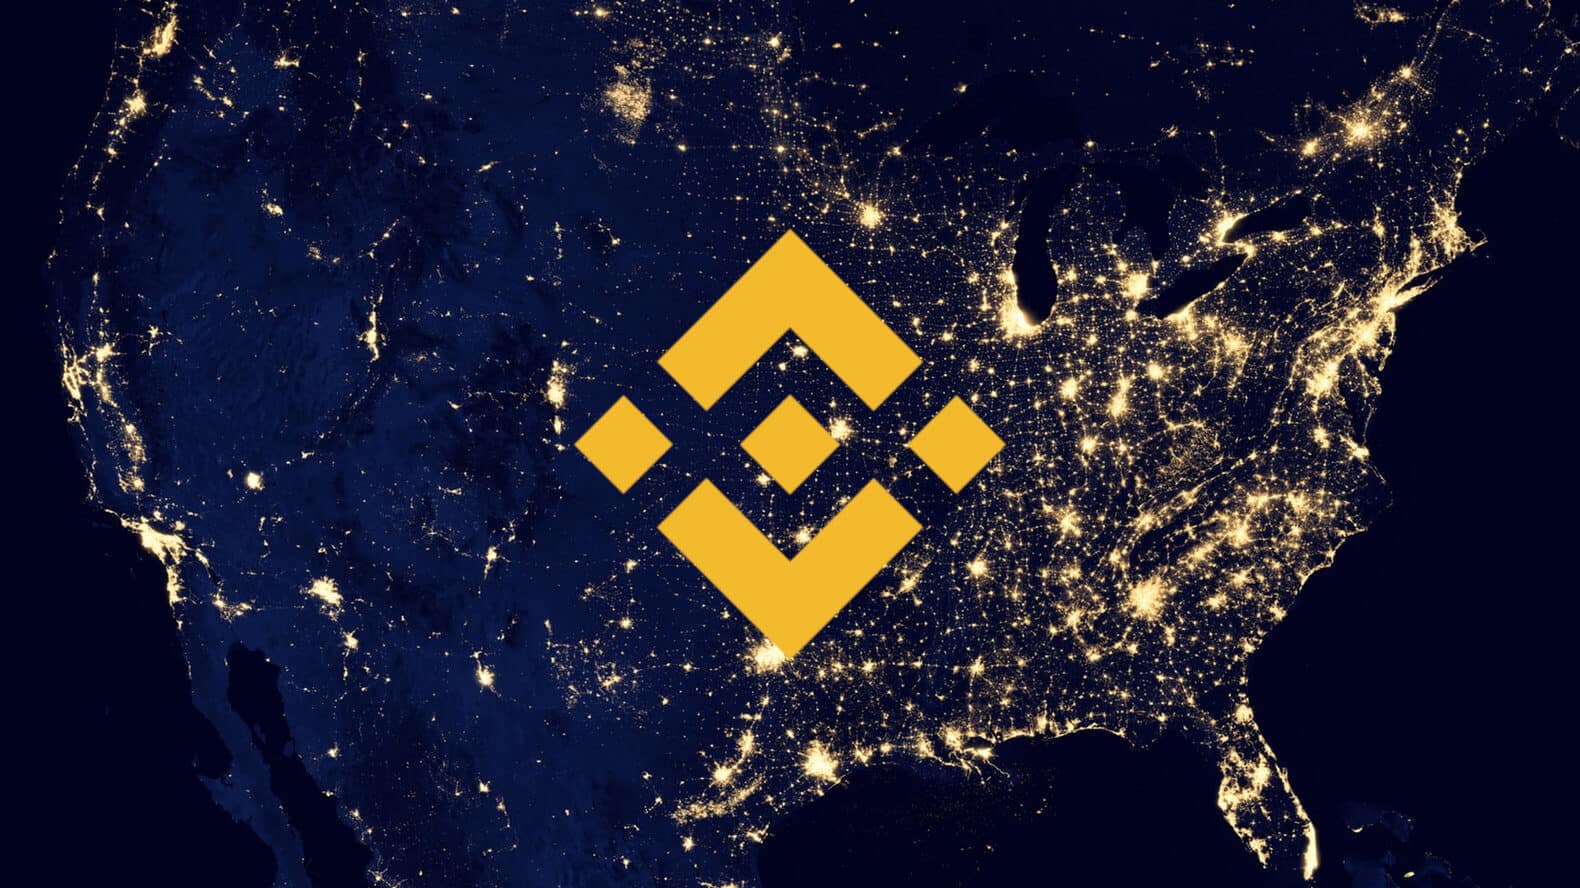 Binance P2P Platform Adds Support for 5 Fiat Currencies in Latin America